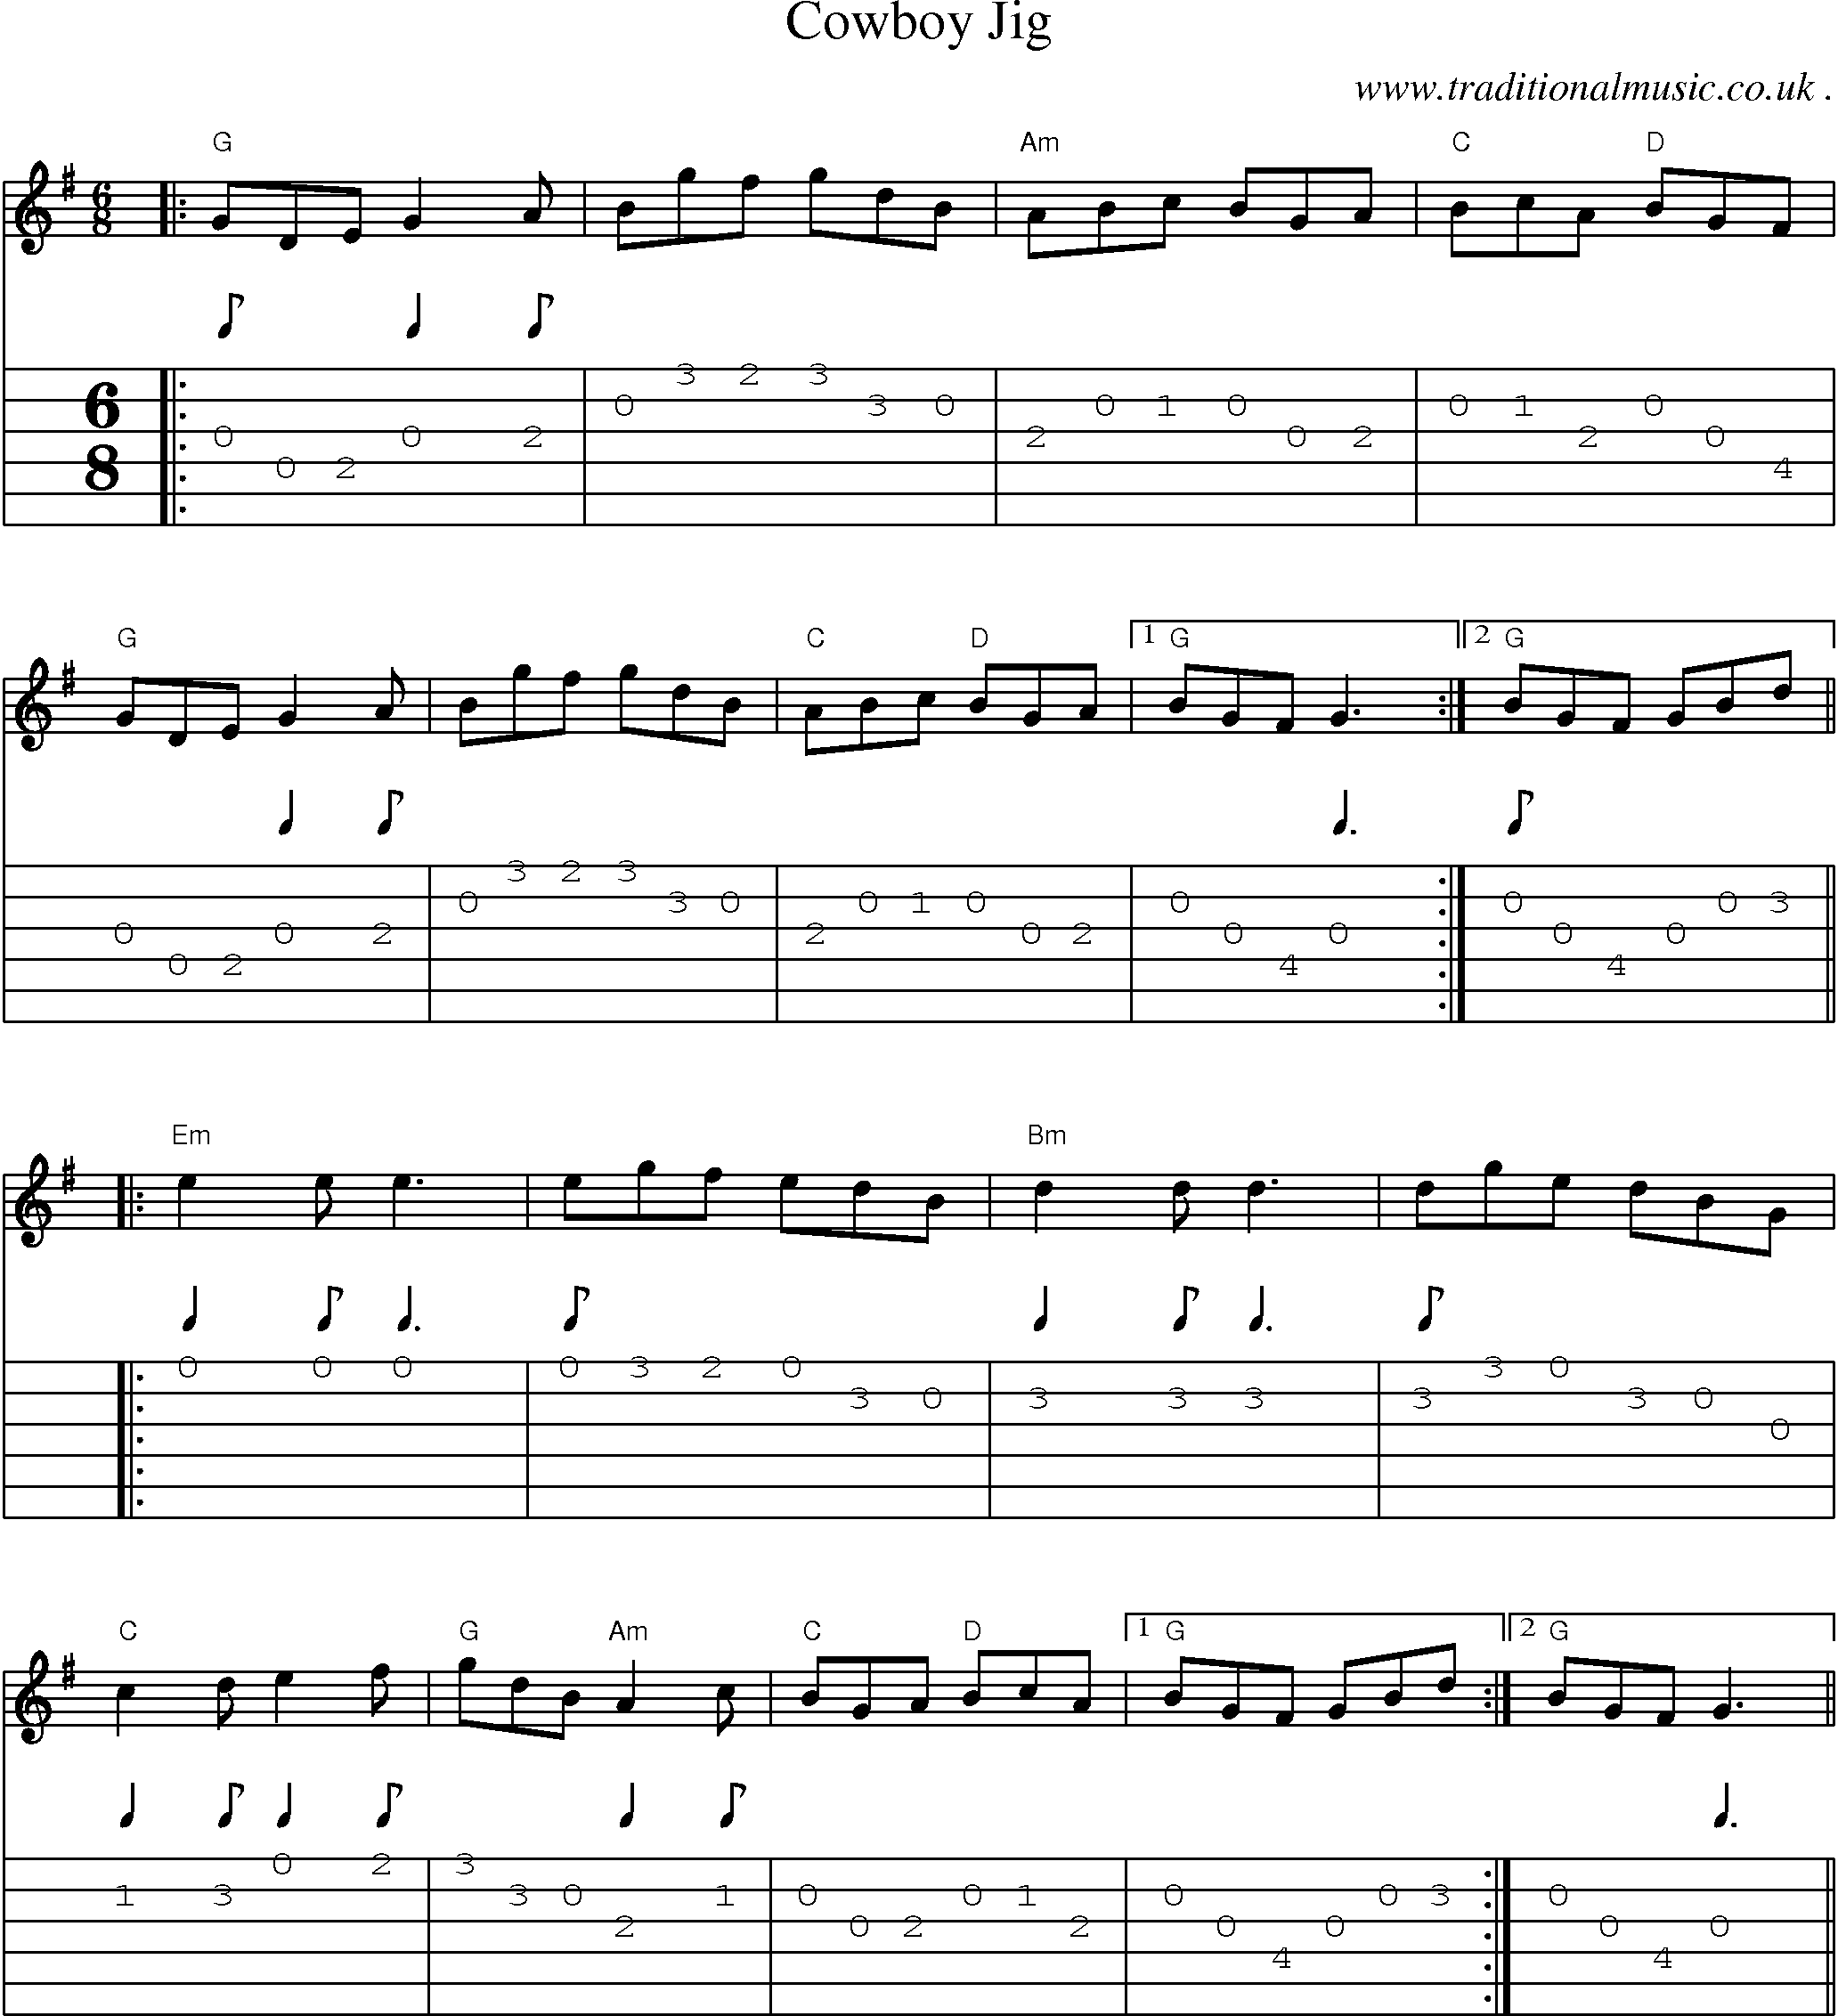 Music Score and Guitar Tabs for Cowboy Jig